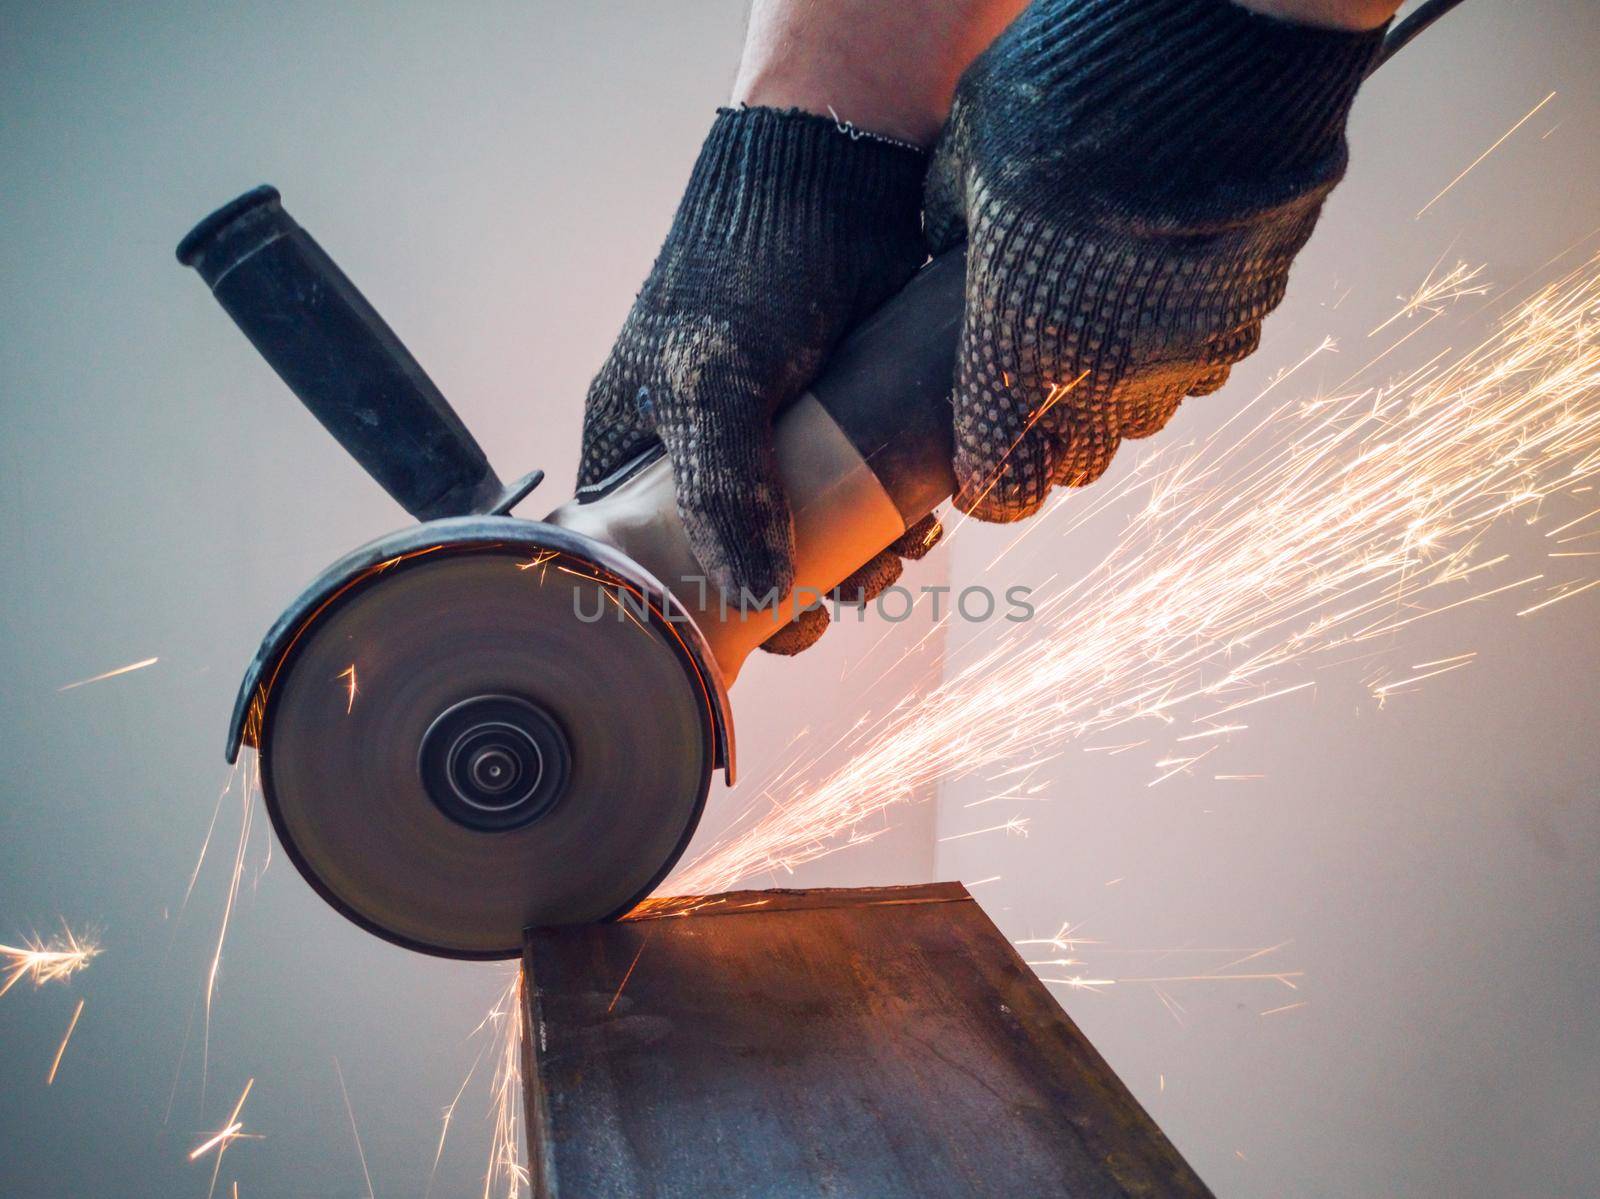 Sawing metal sparks by Yellowj